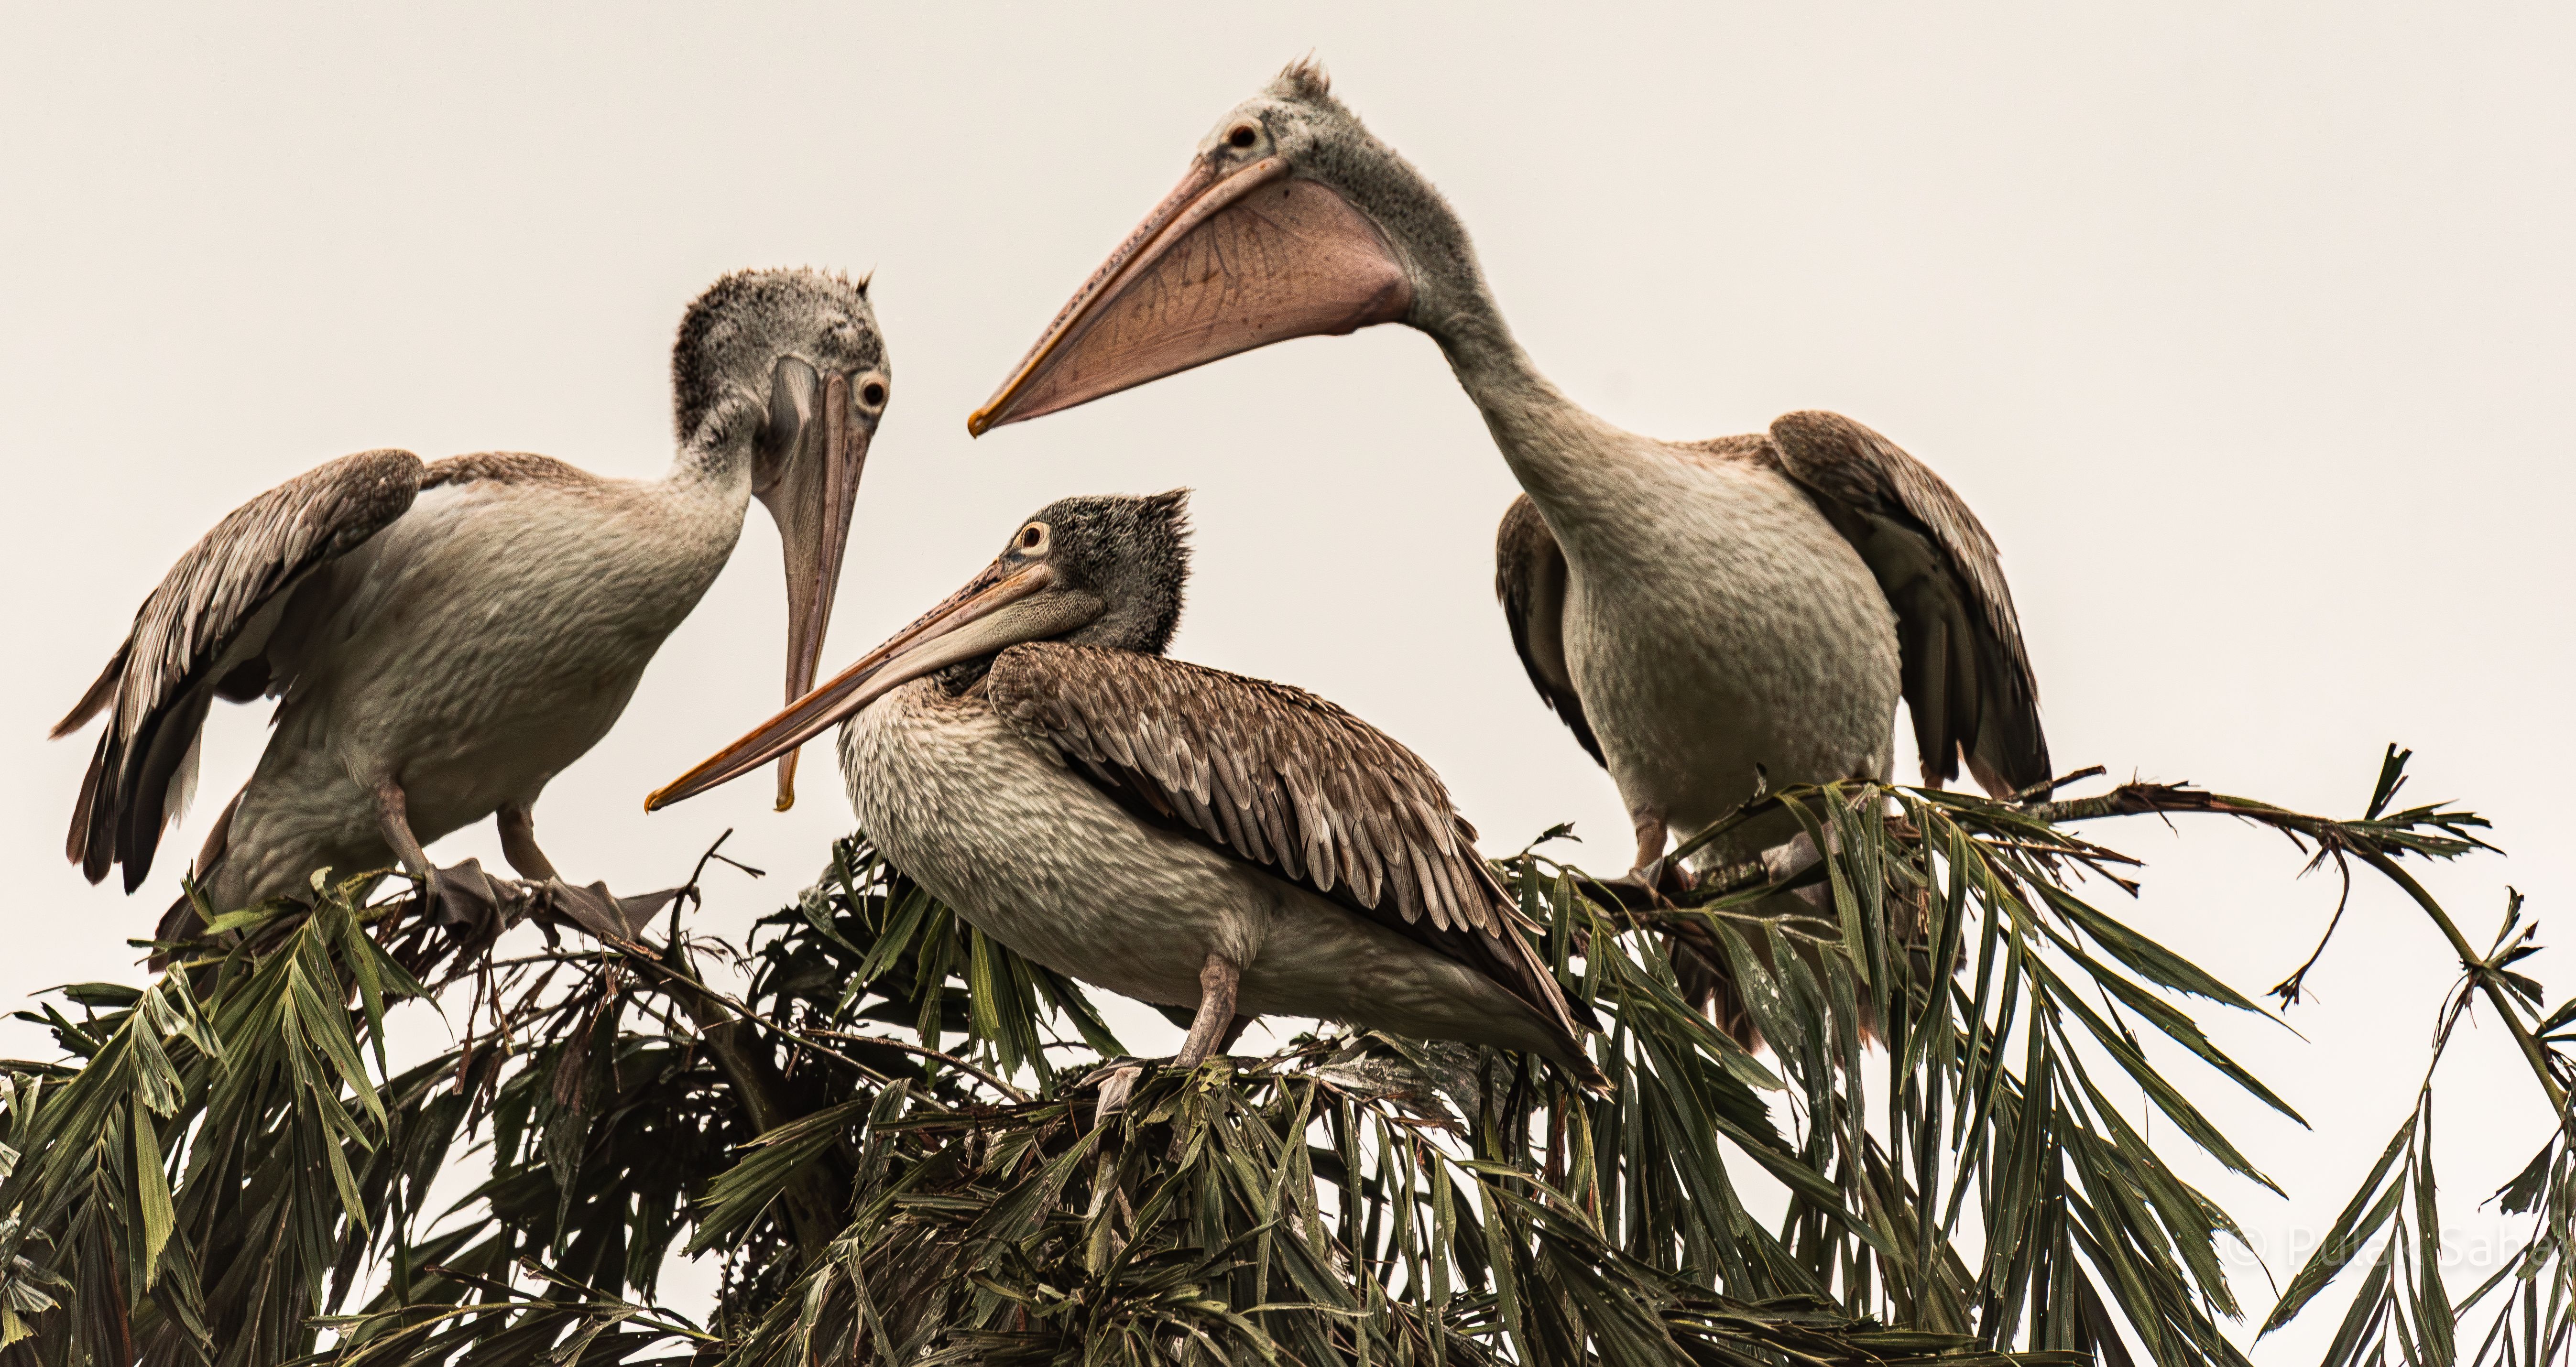 Pelicans perched on tree